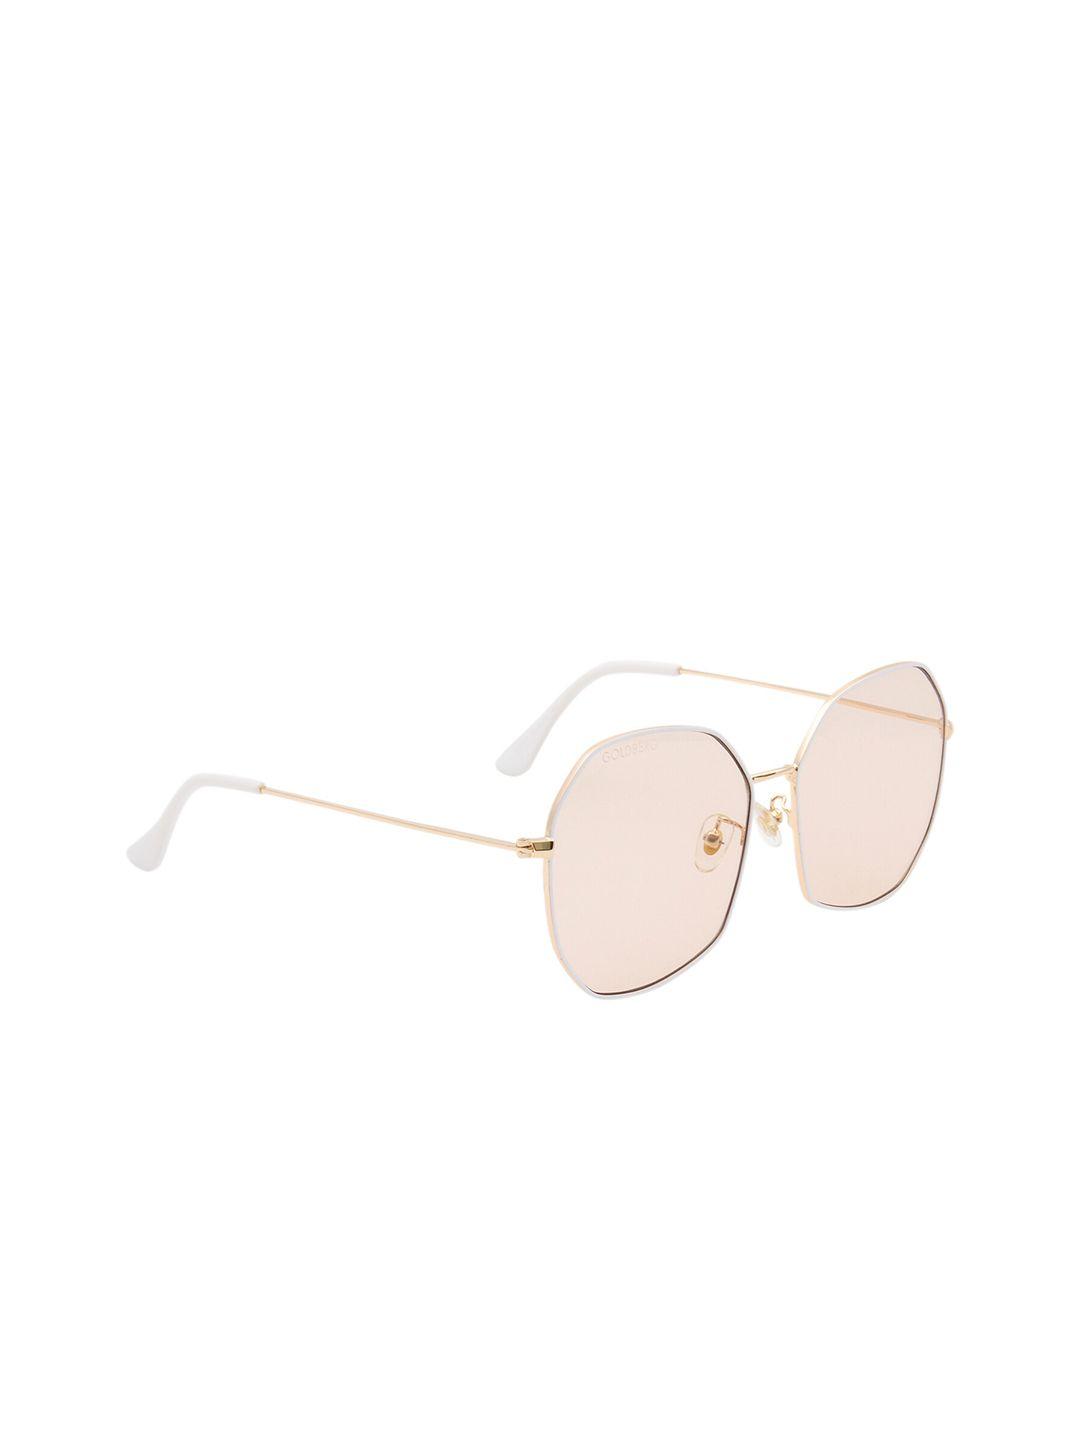 gold berg unisex round sunglasses with uv protected lens